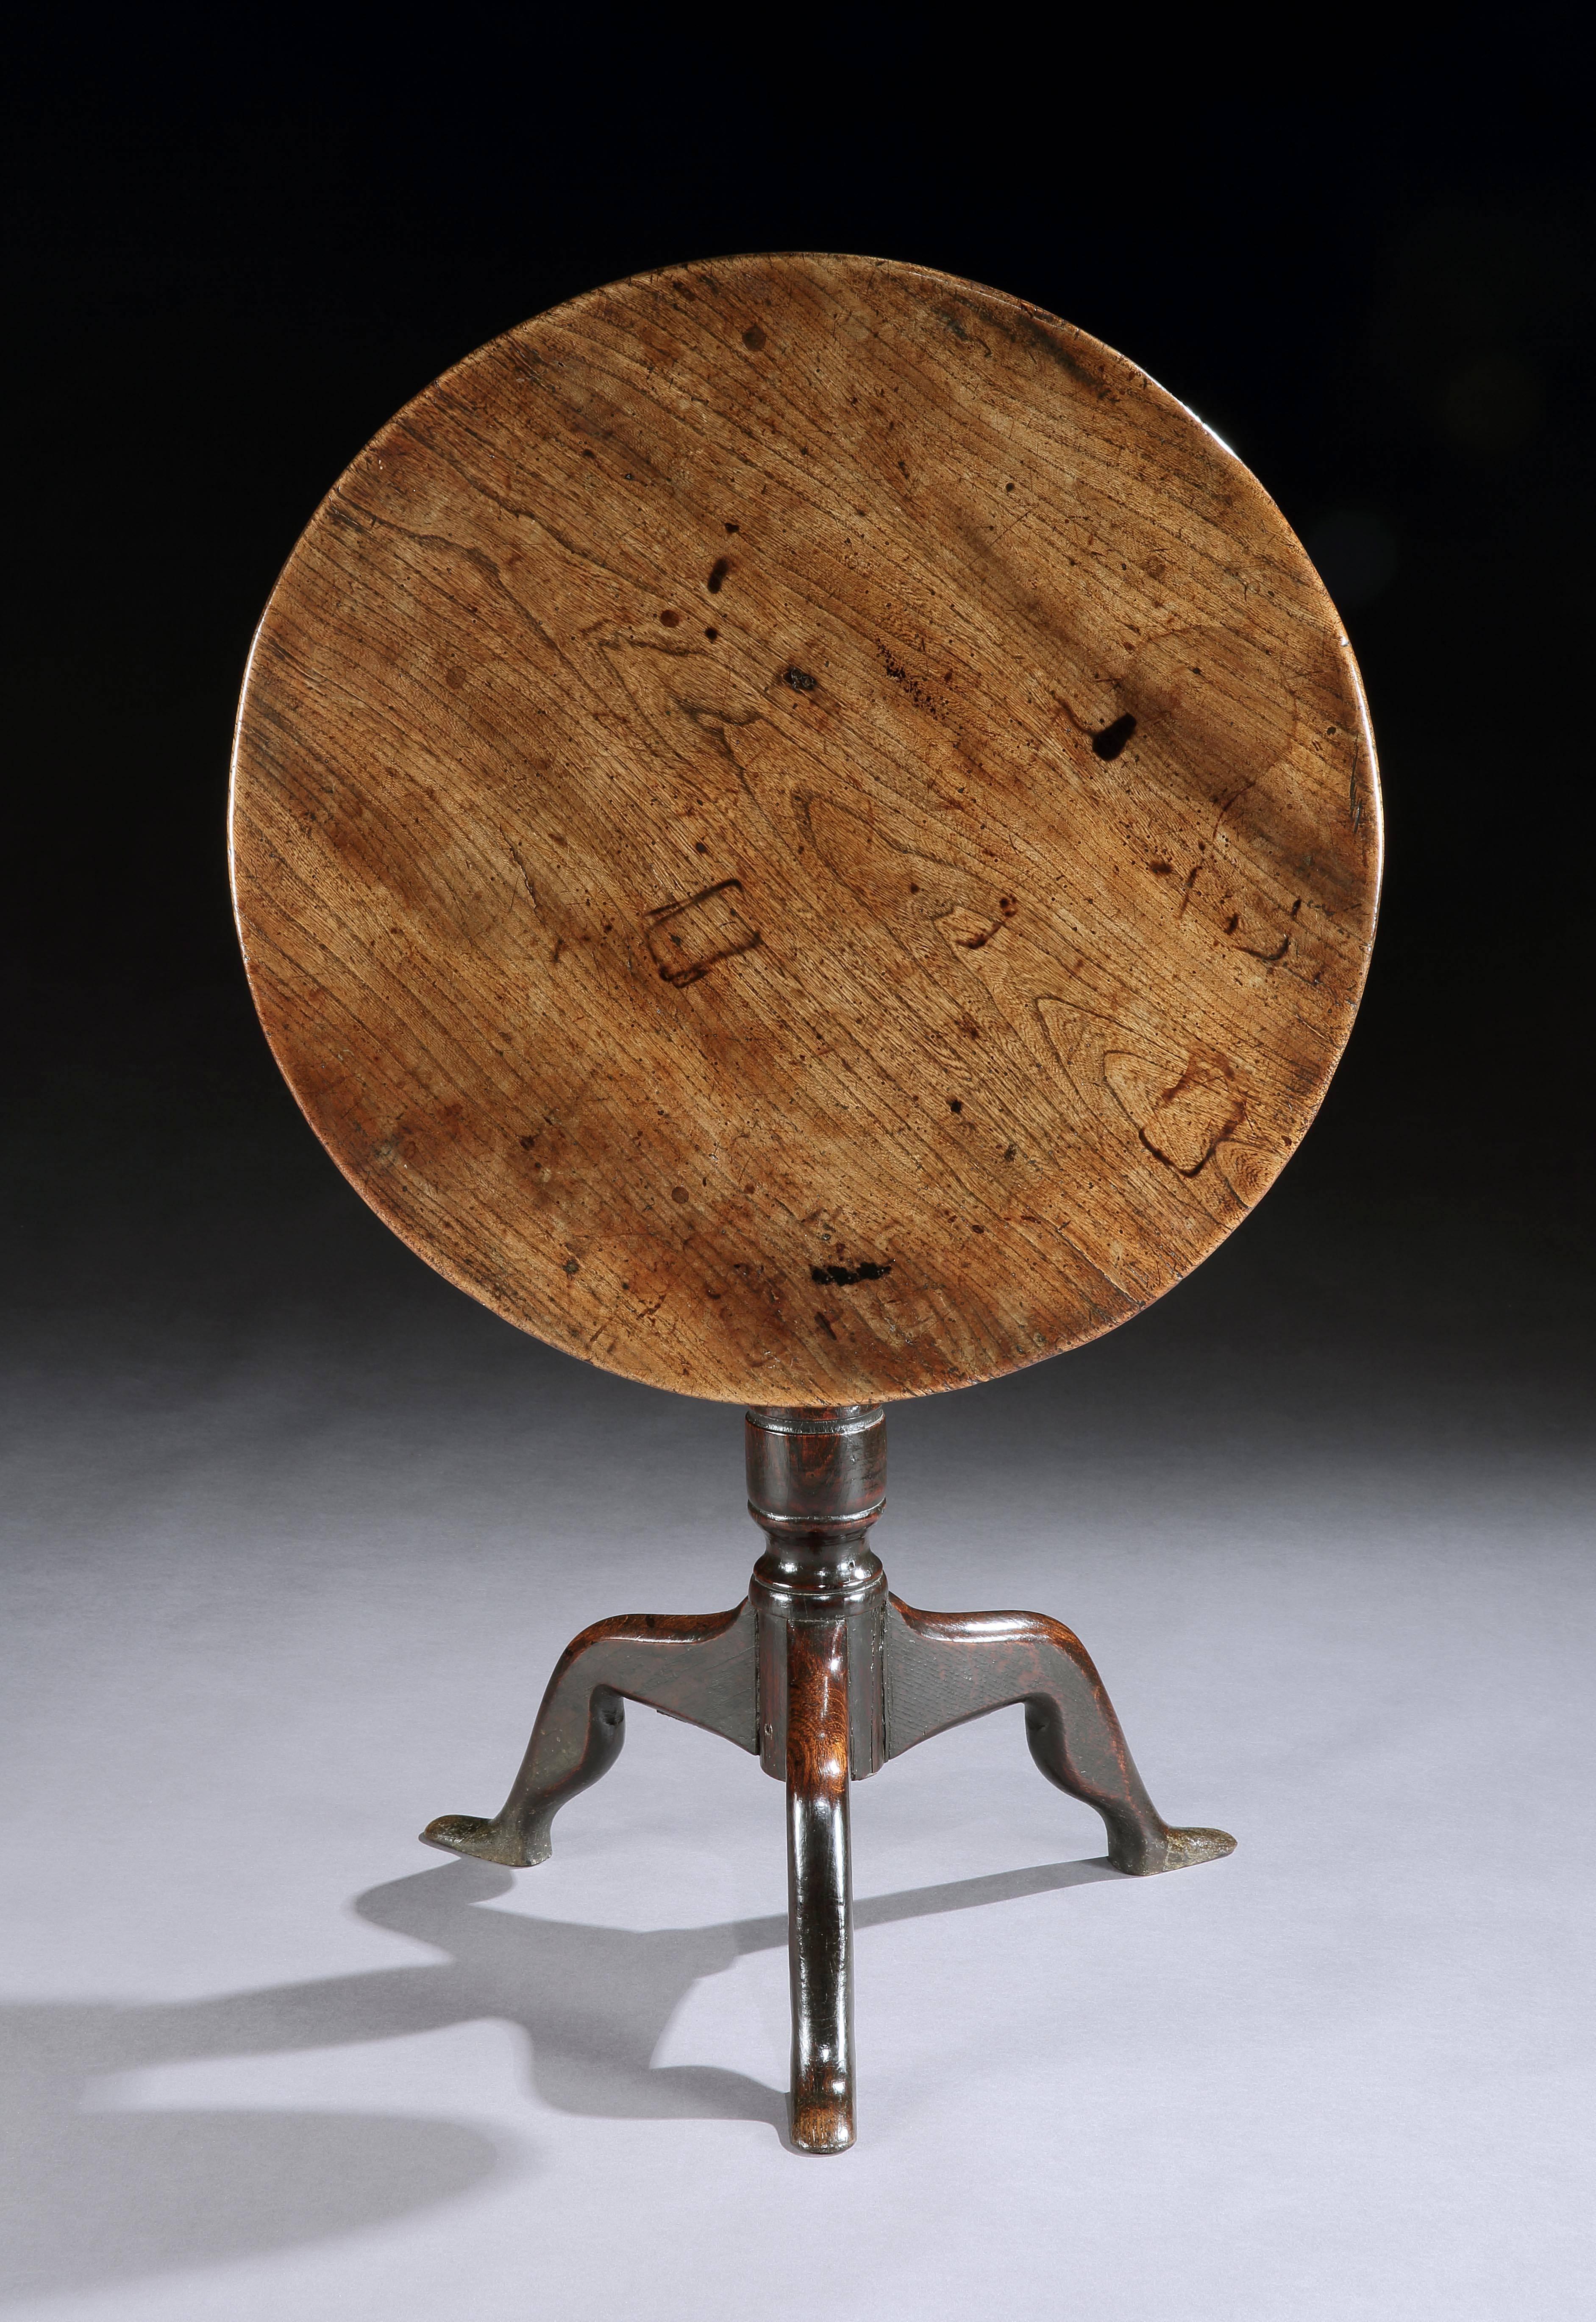 Single plank tripod wine table with revolving top raised on Silhouette “Human” leg tripod base of vernacular “Manx” form honey colored and well patinated elm and oak English, circa 1770. Measures: 25” high x 25” wide x 24” deep.